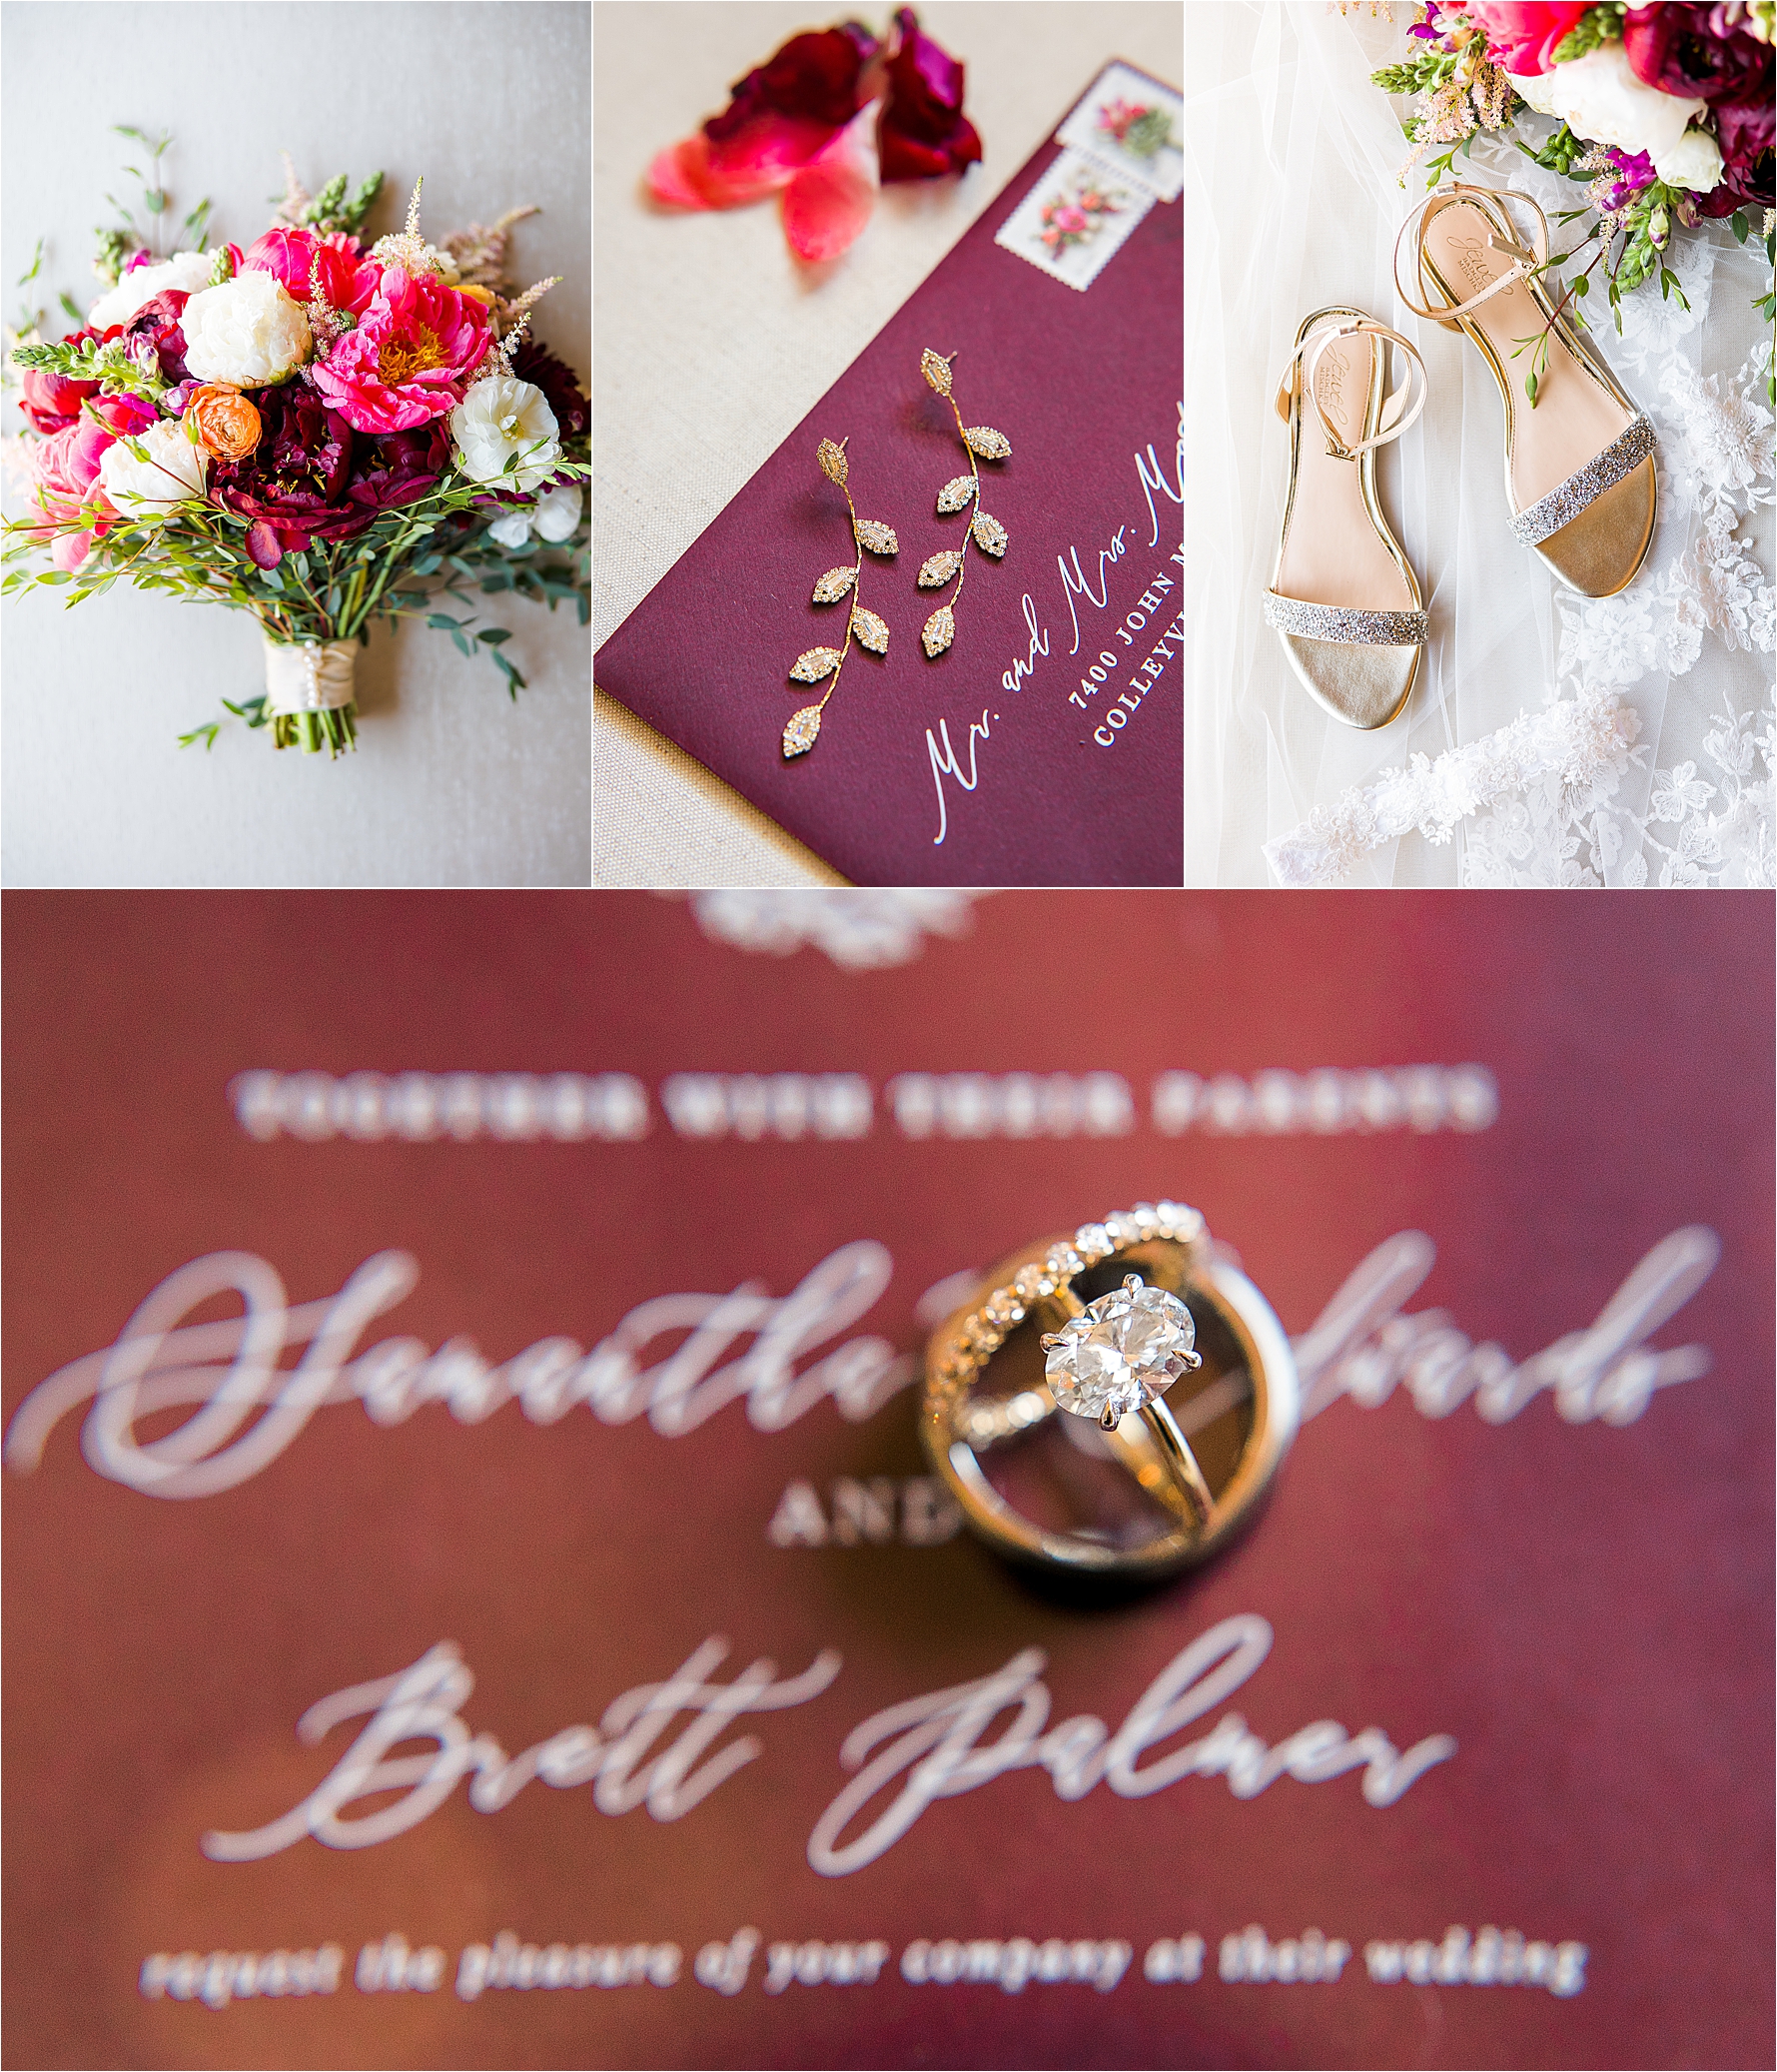 Wedding Rings on a Maroom invitation and colorful bridal details at a Hickory Street Annex Wedding in Dallas, TX 